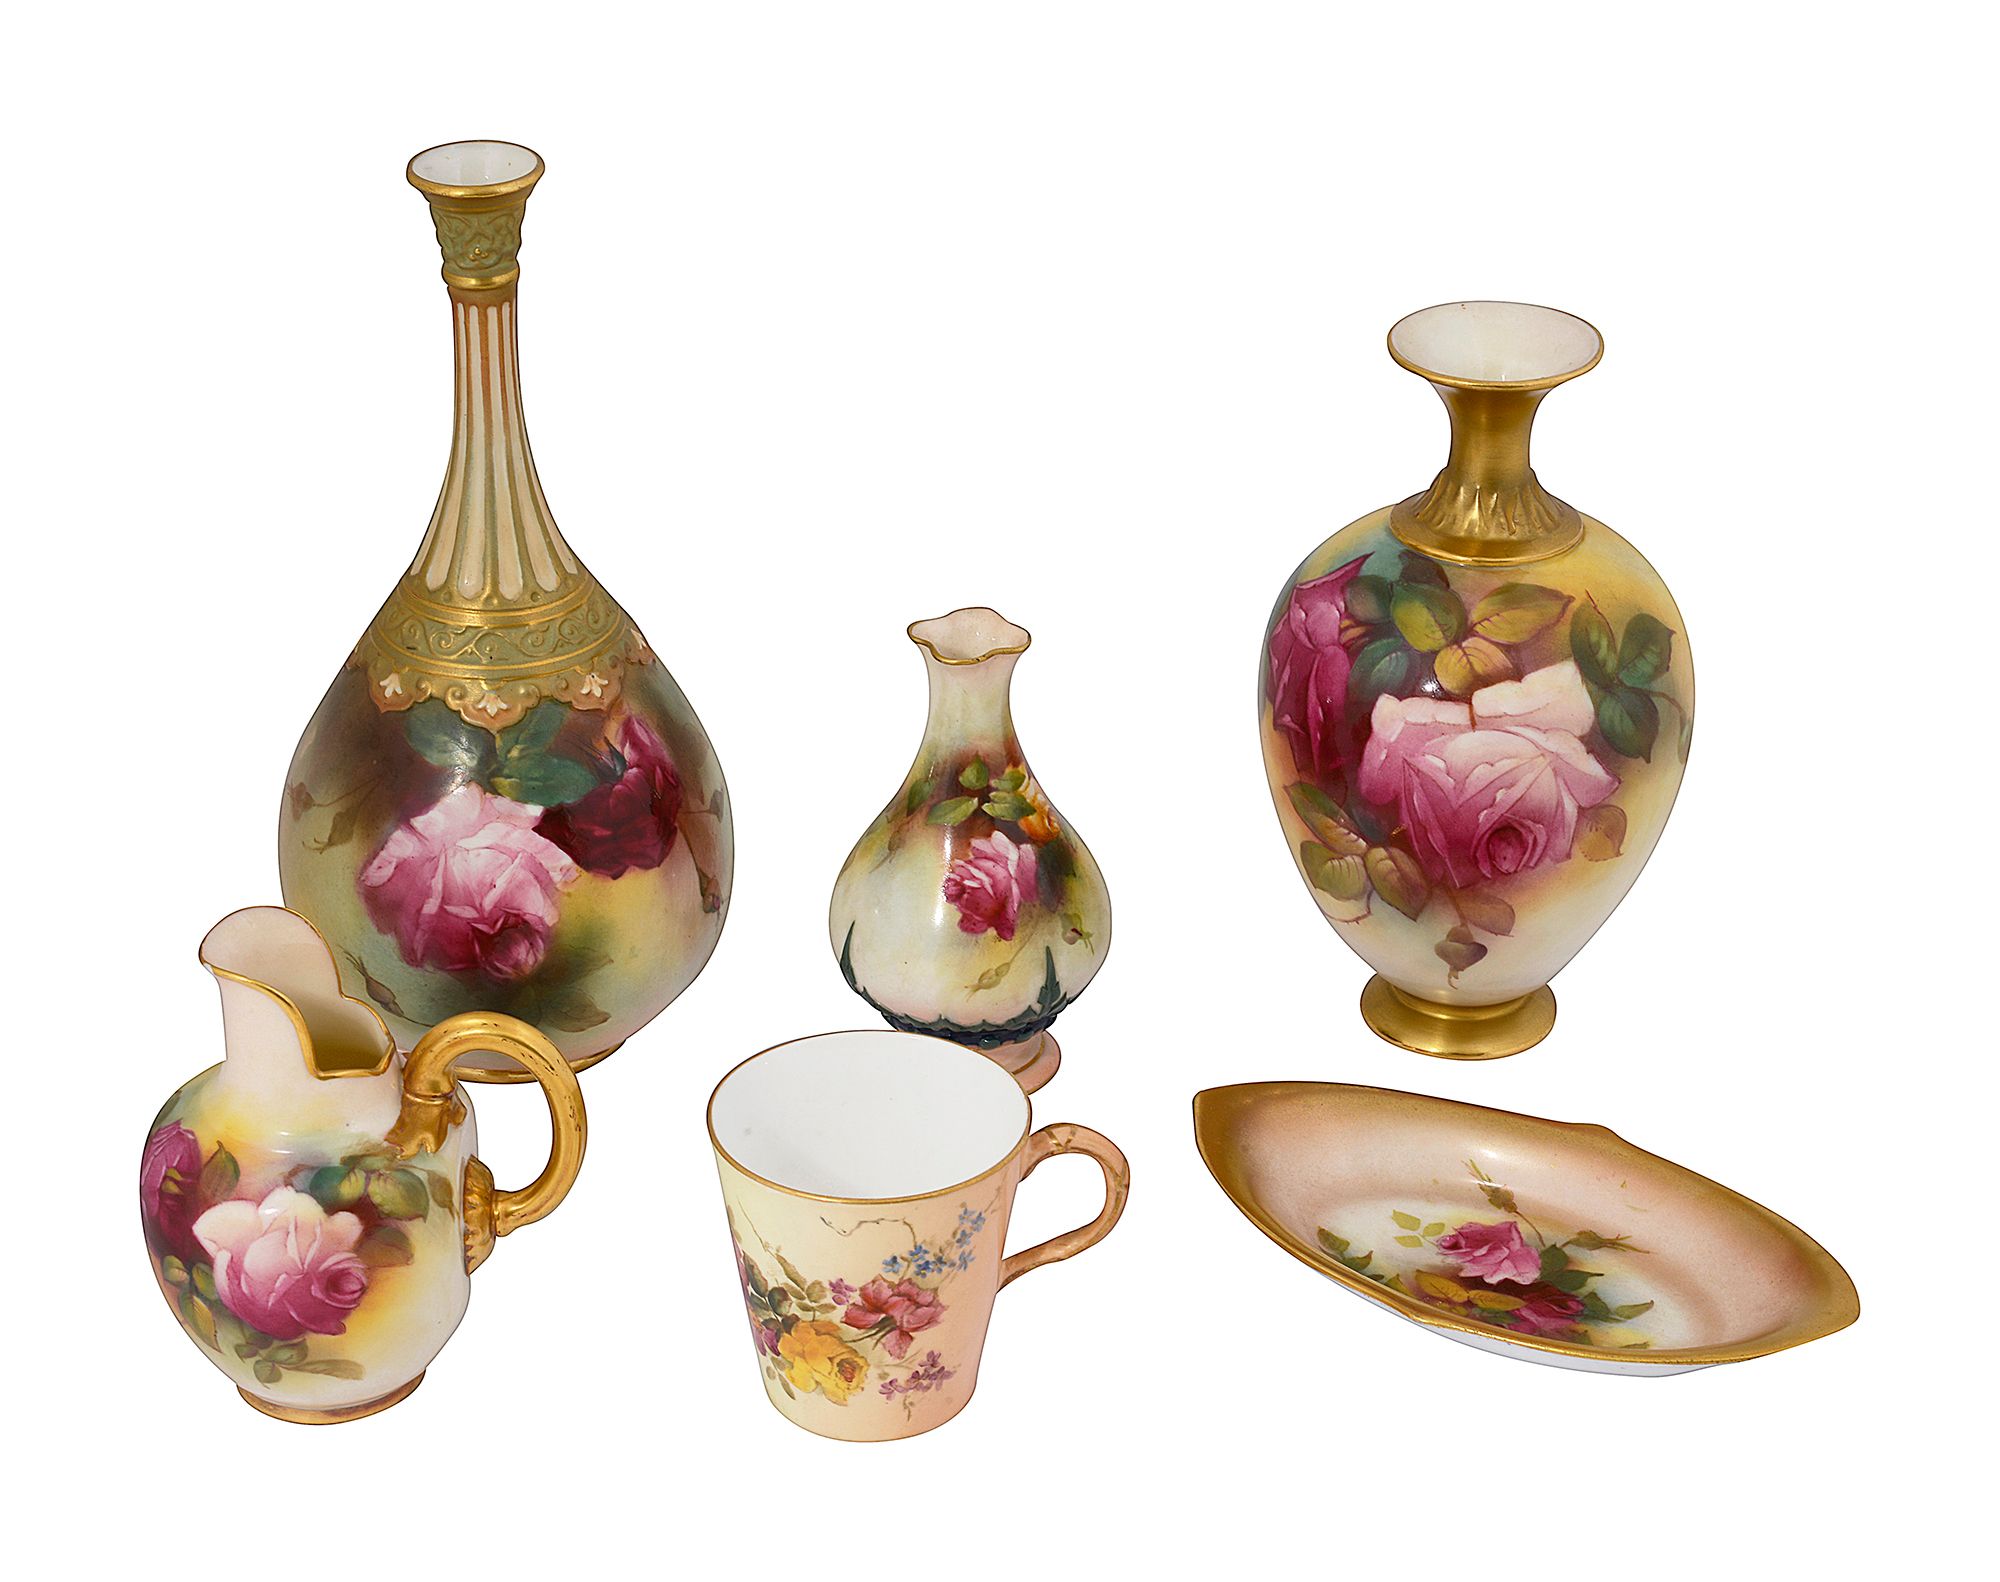 Royal Worcester blush ivory vases and other items